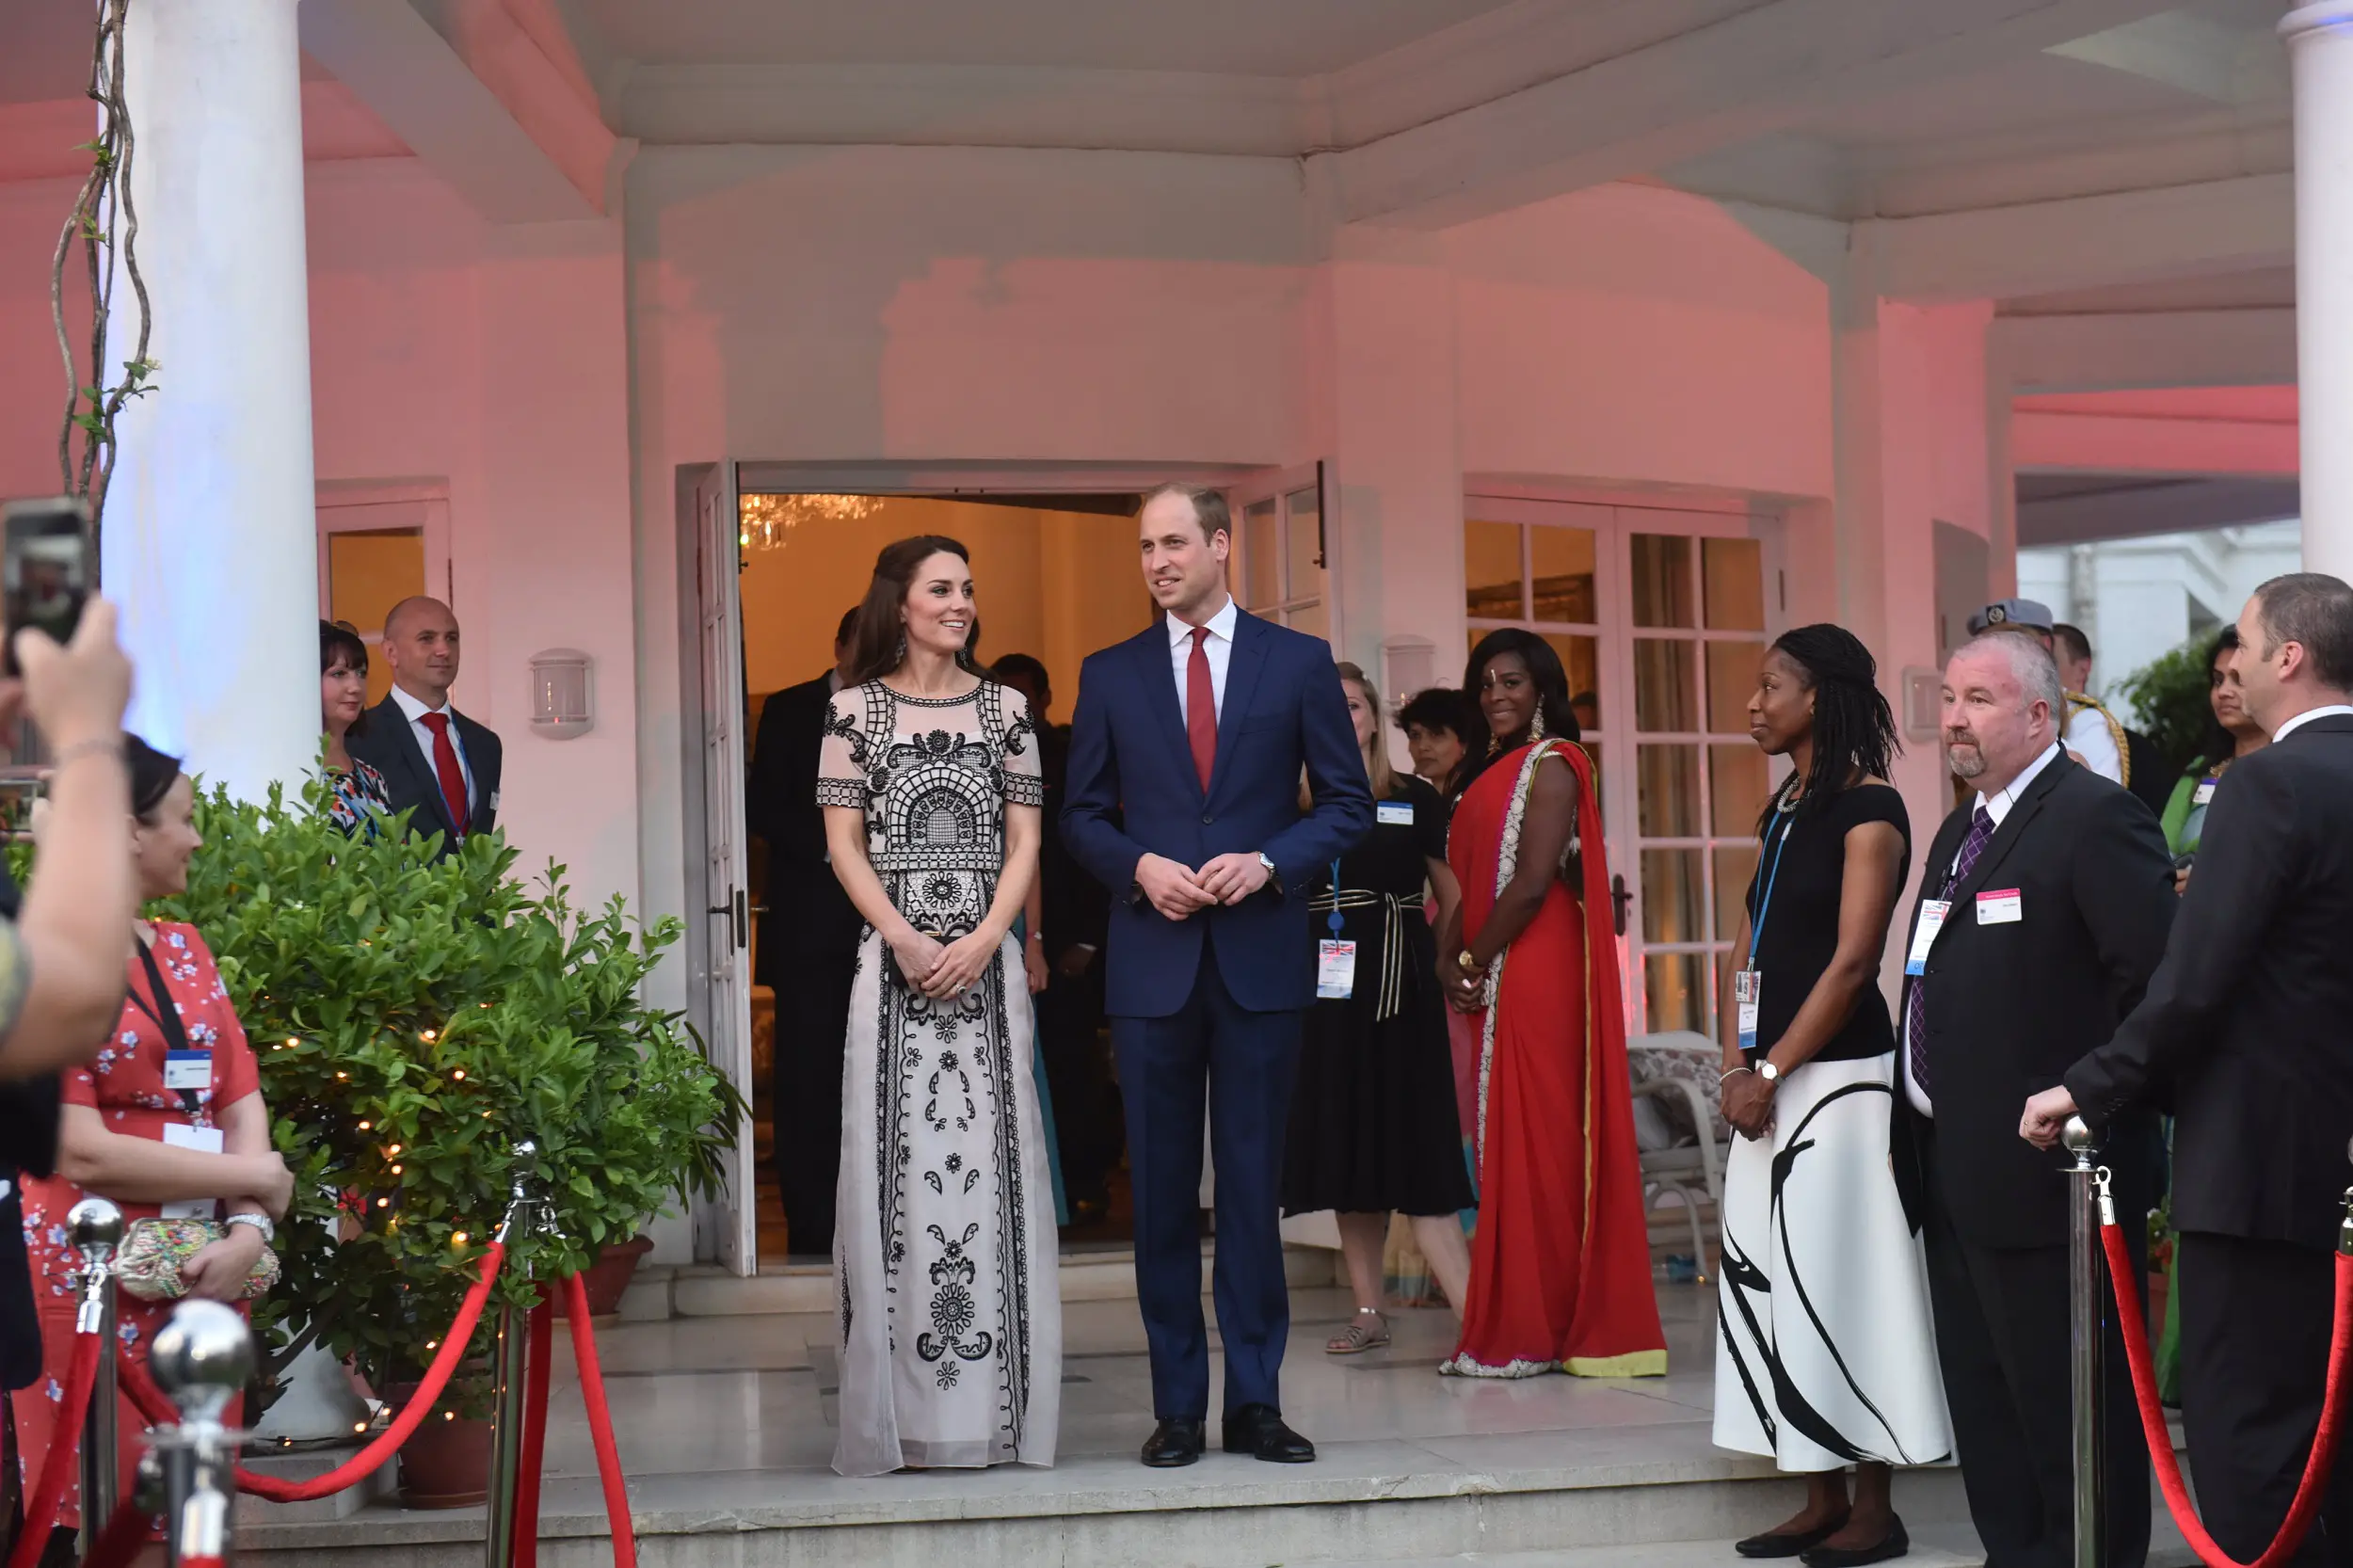 The Duke and Duchess of Cambridge attended Queen's 90th birthday party during the India tour